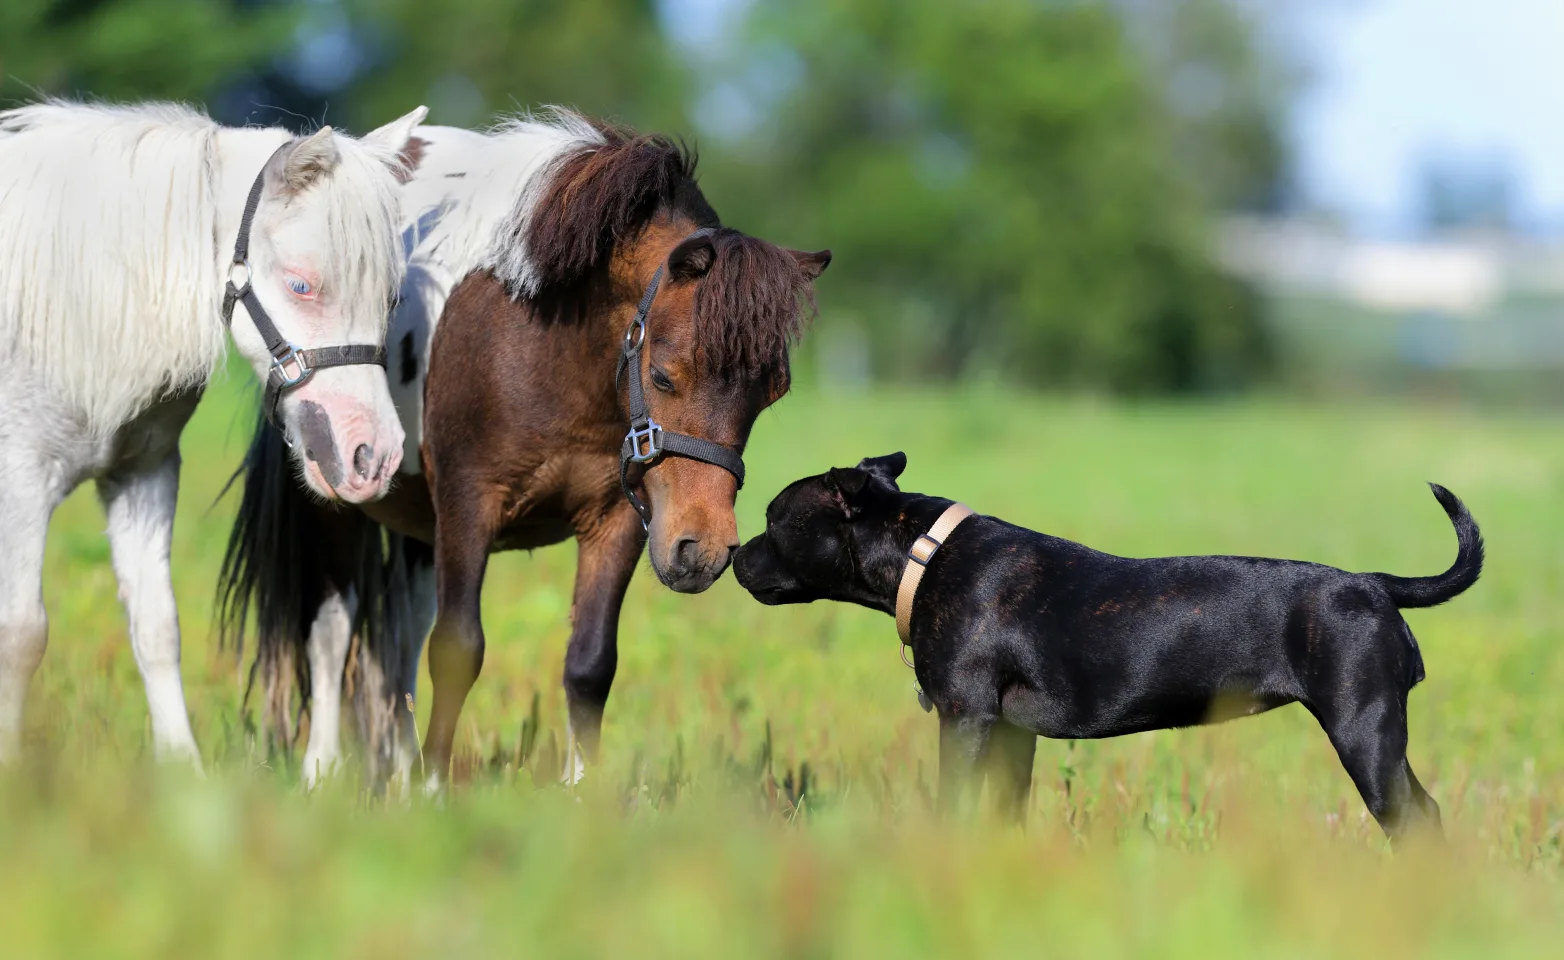 Dog and Horses in a field